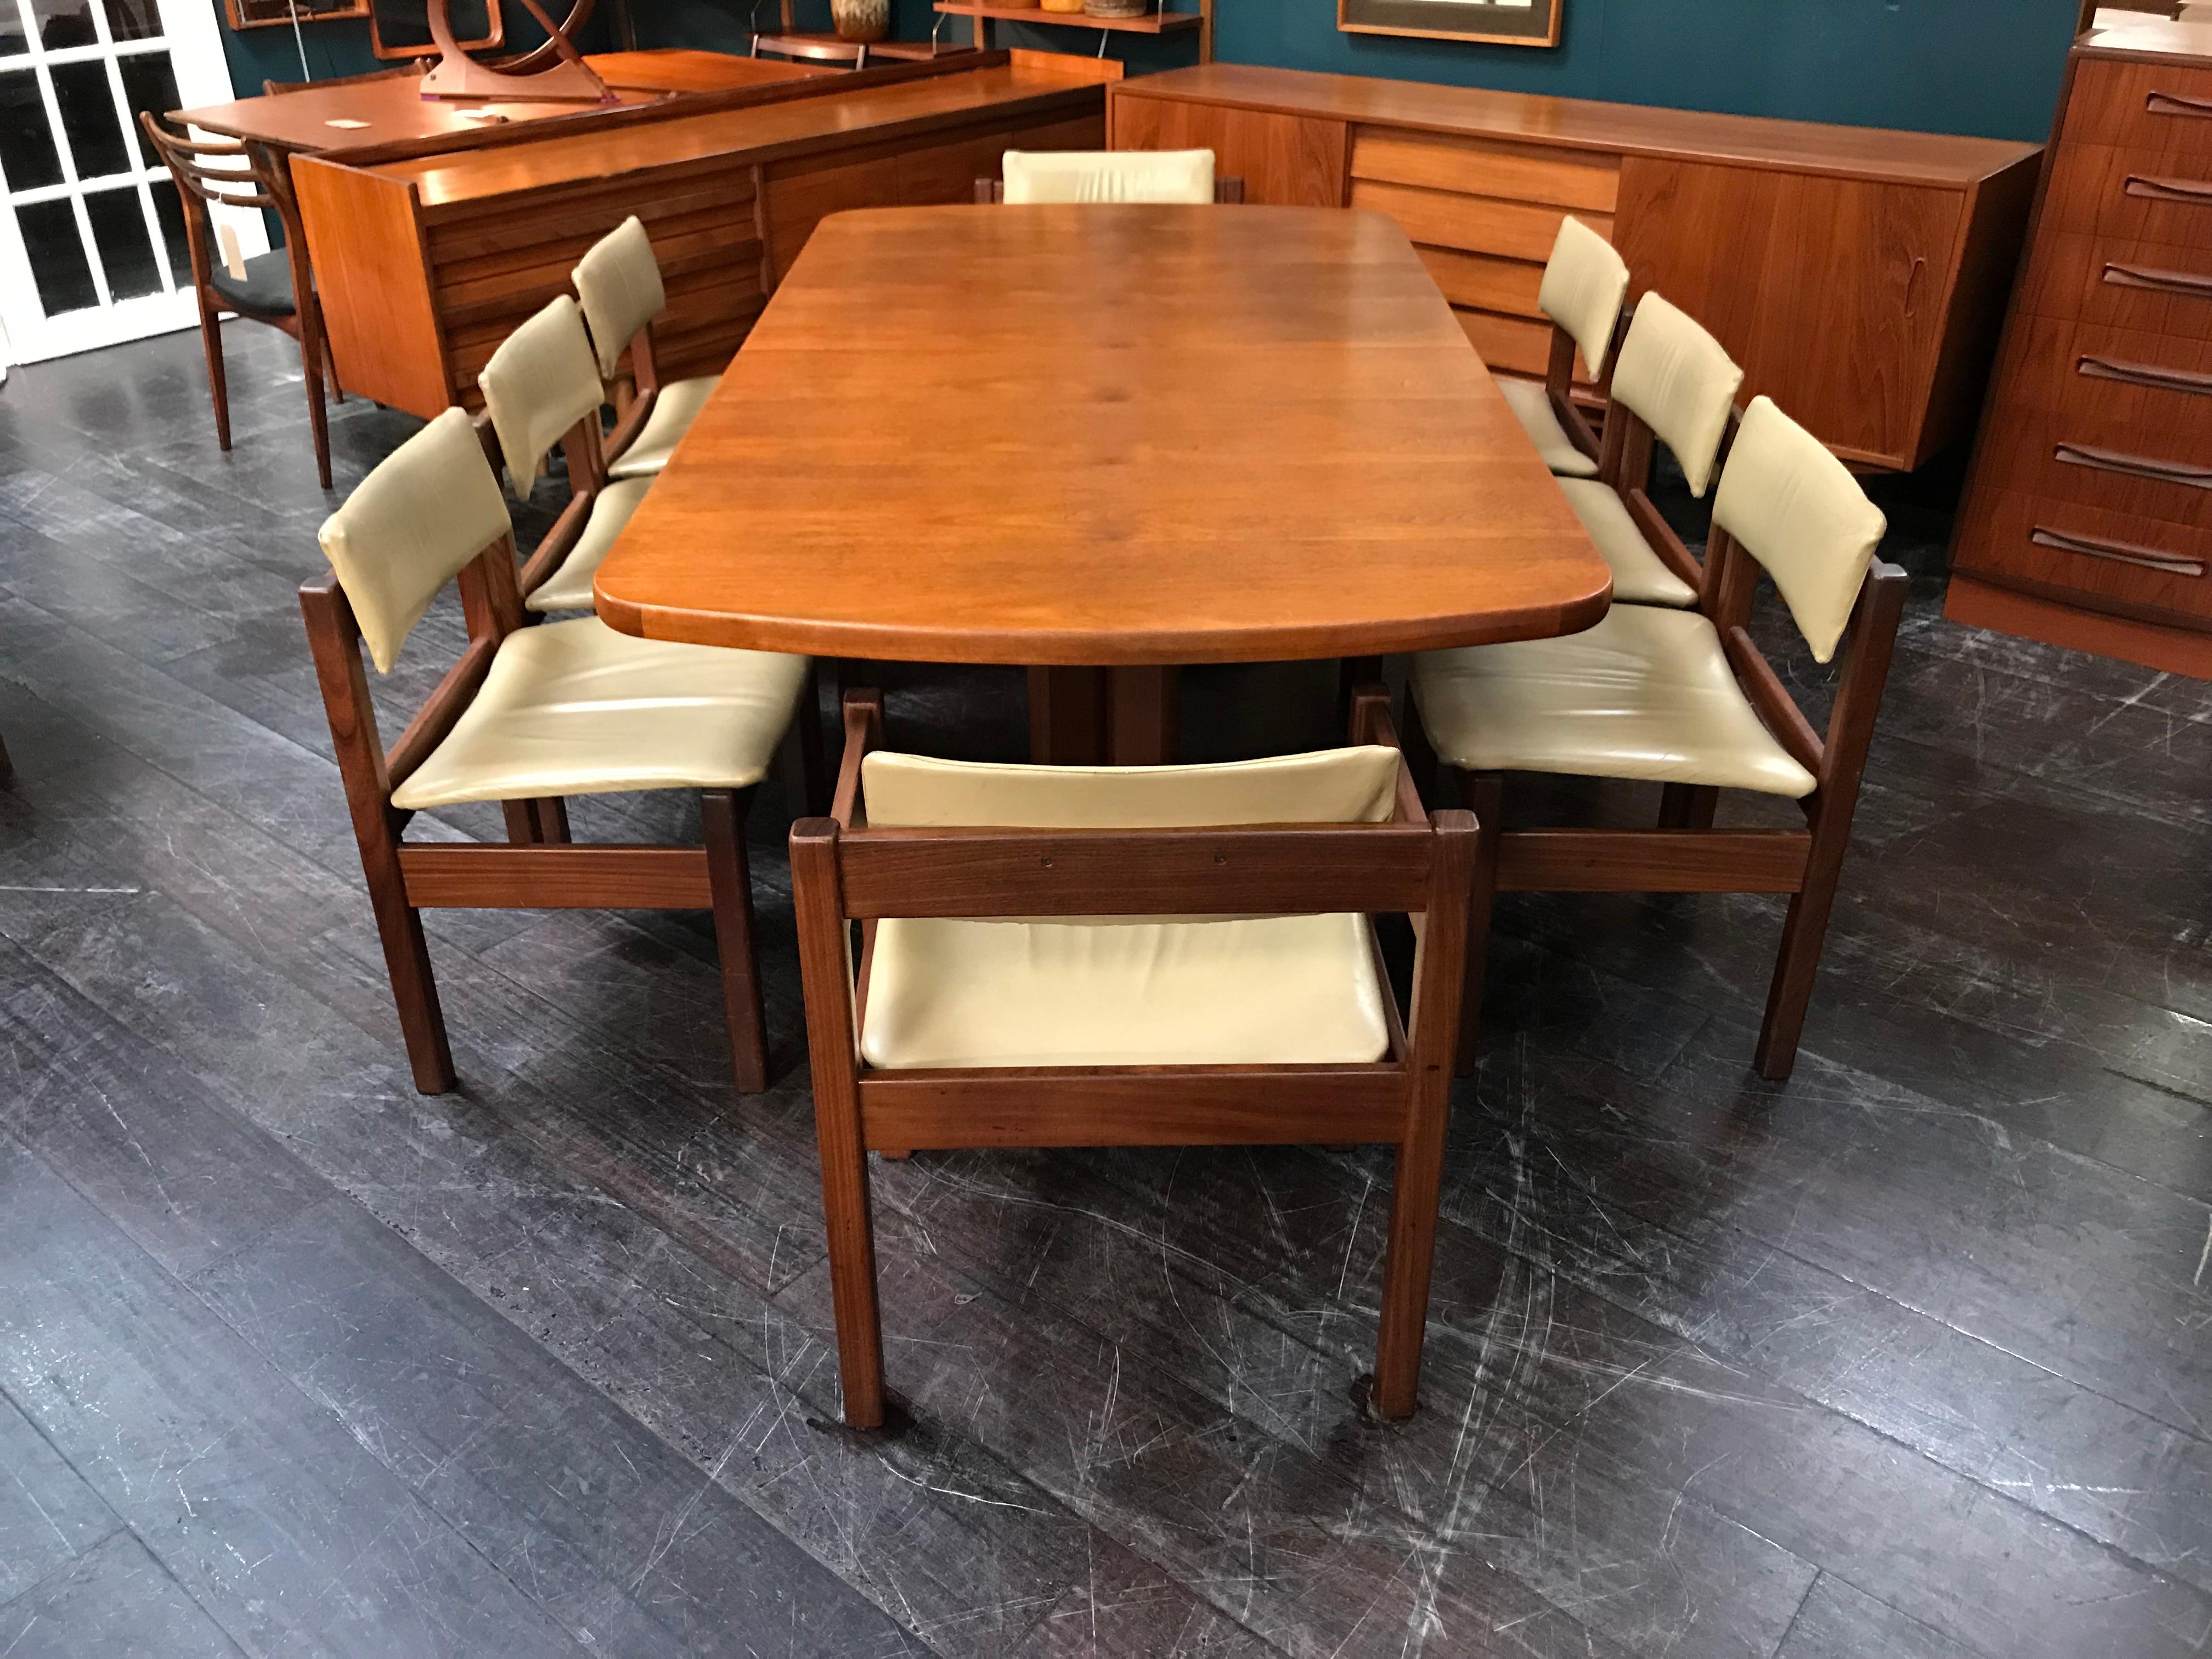 British Midcentury Teak Dining Table and 8-Leather Chairs by Gordon Russell 2